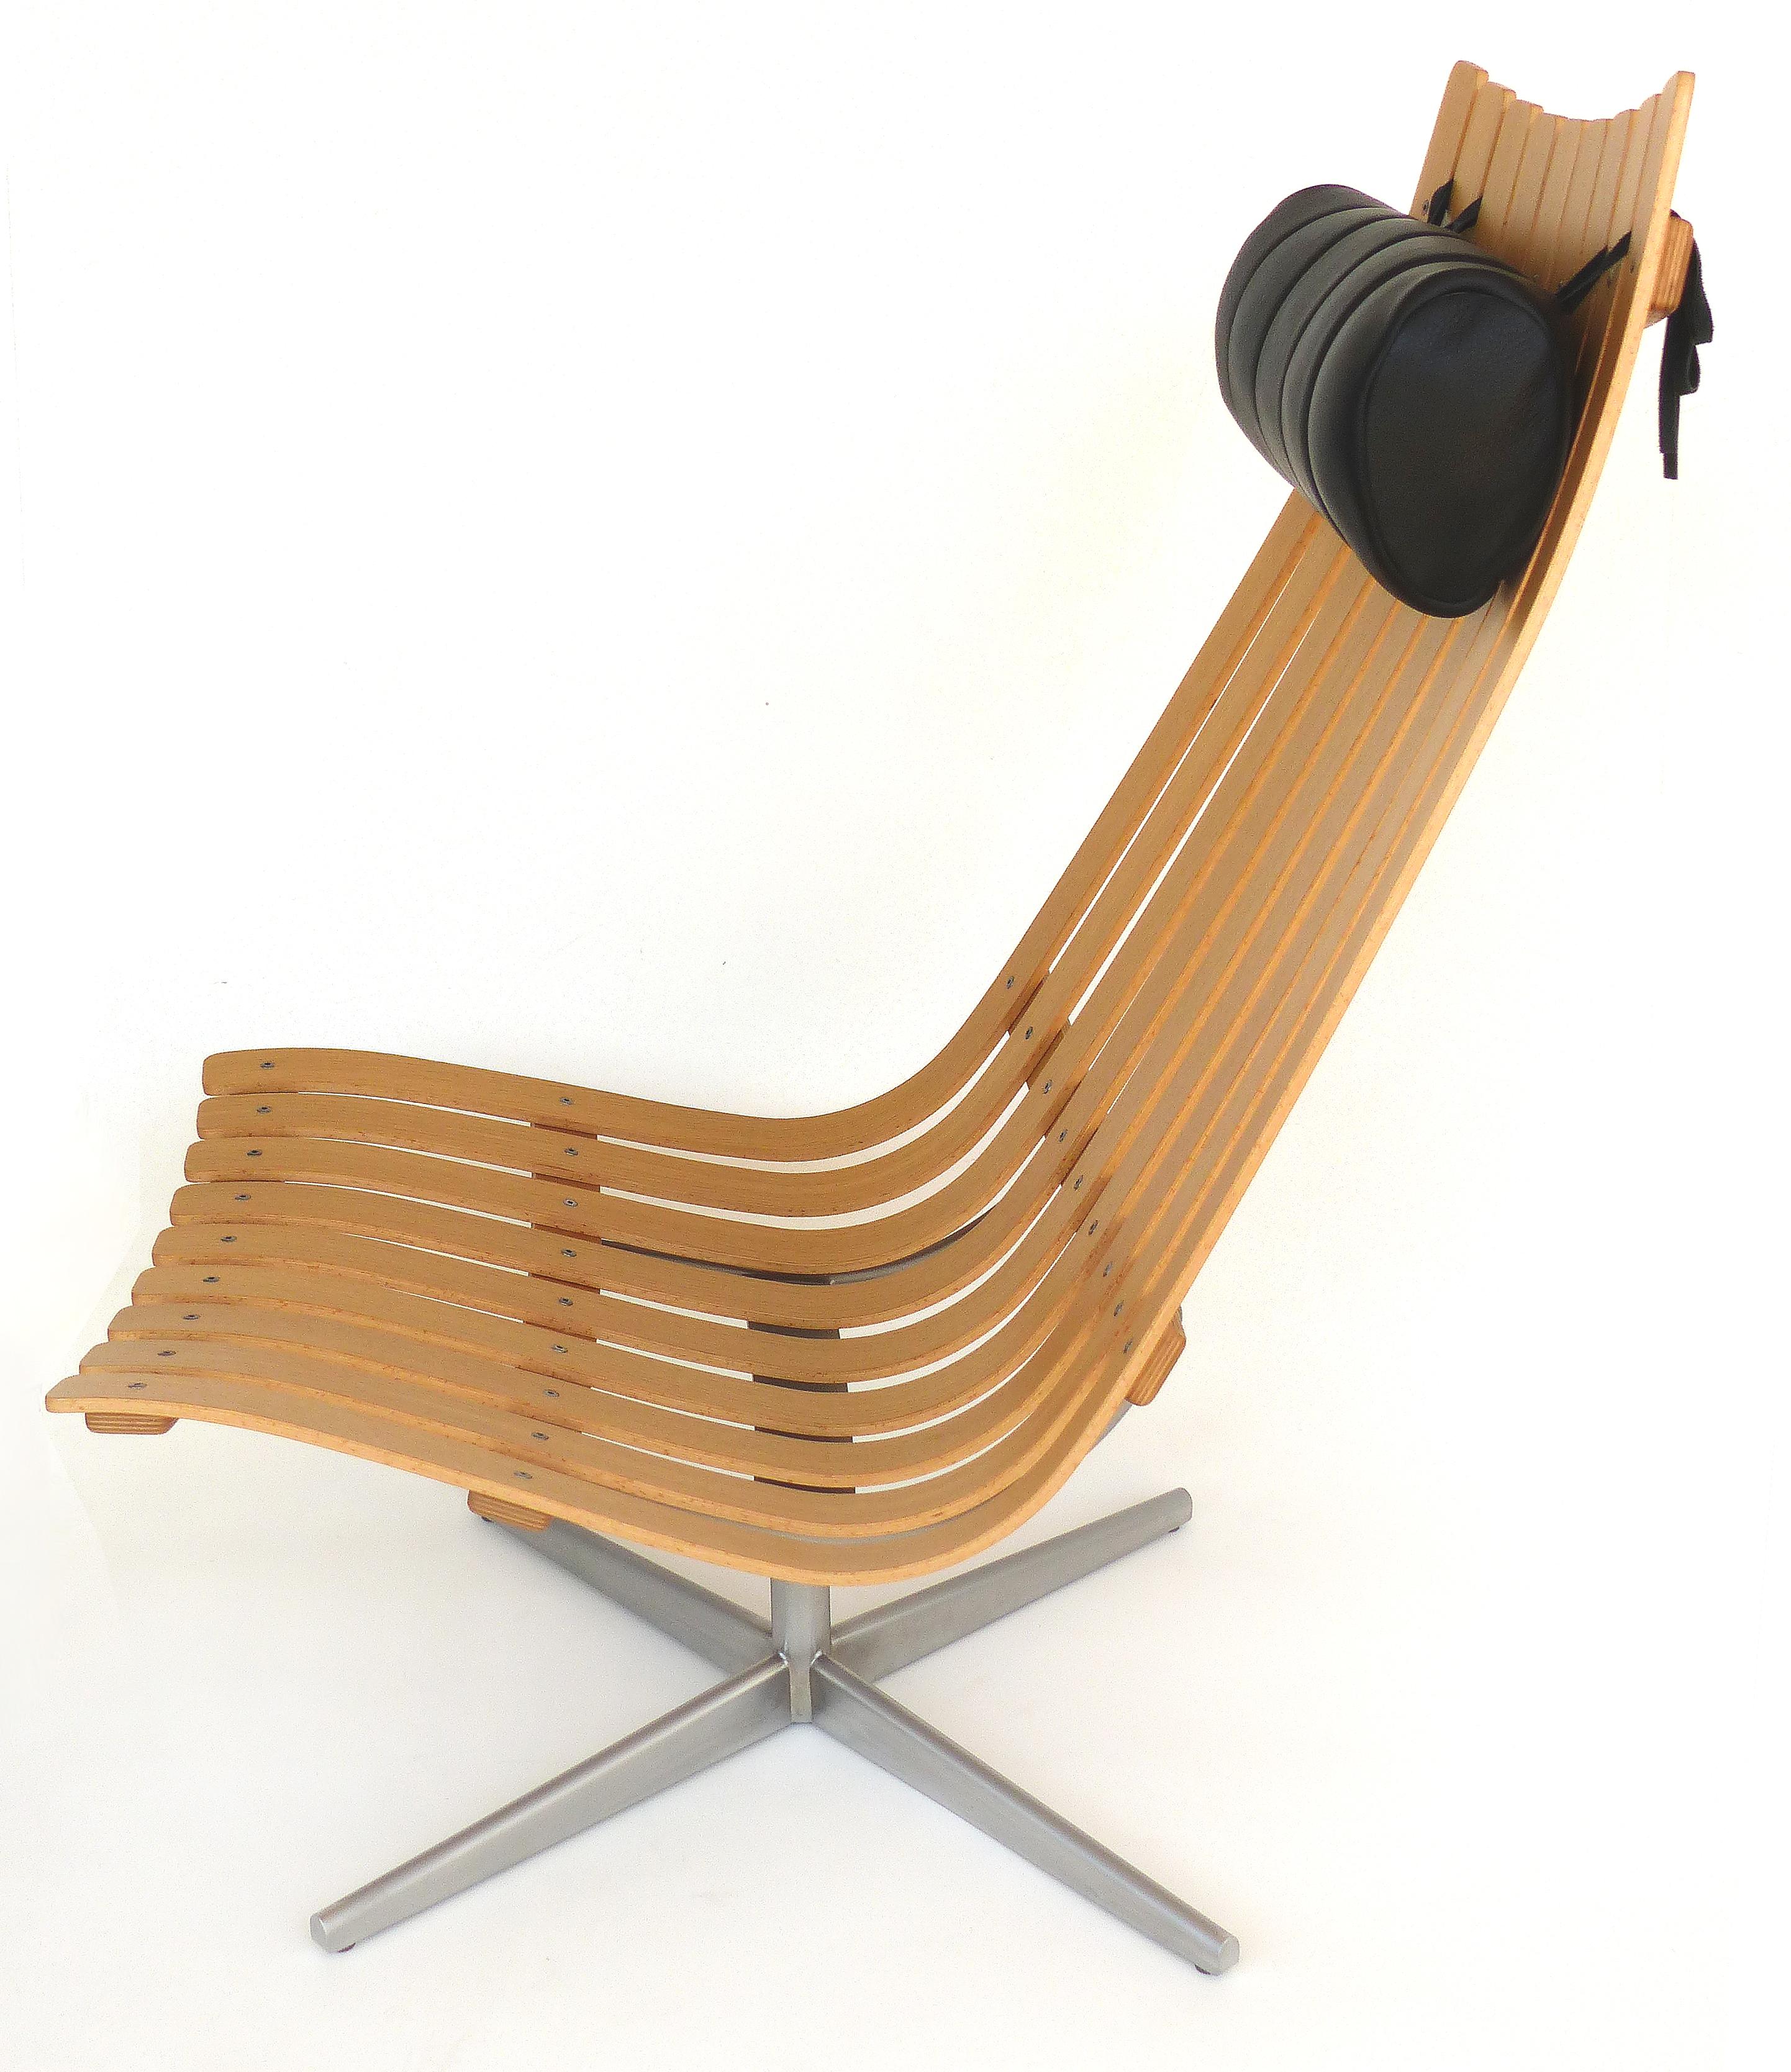 2010s Hans Battrud Senior Bentwood Swivel Chair, Norway

Offered for sale is a Norwegian design classic, the Fjord Fiesta Scandia Senior lounge chair made of laminated, lacquered wood in American oak supported by a matt chrome swivel base and